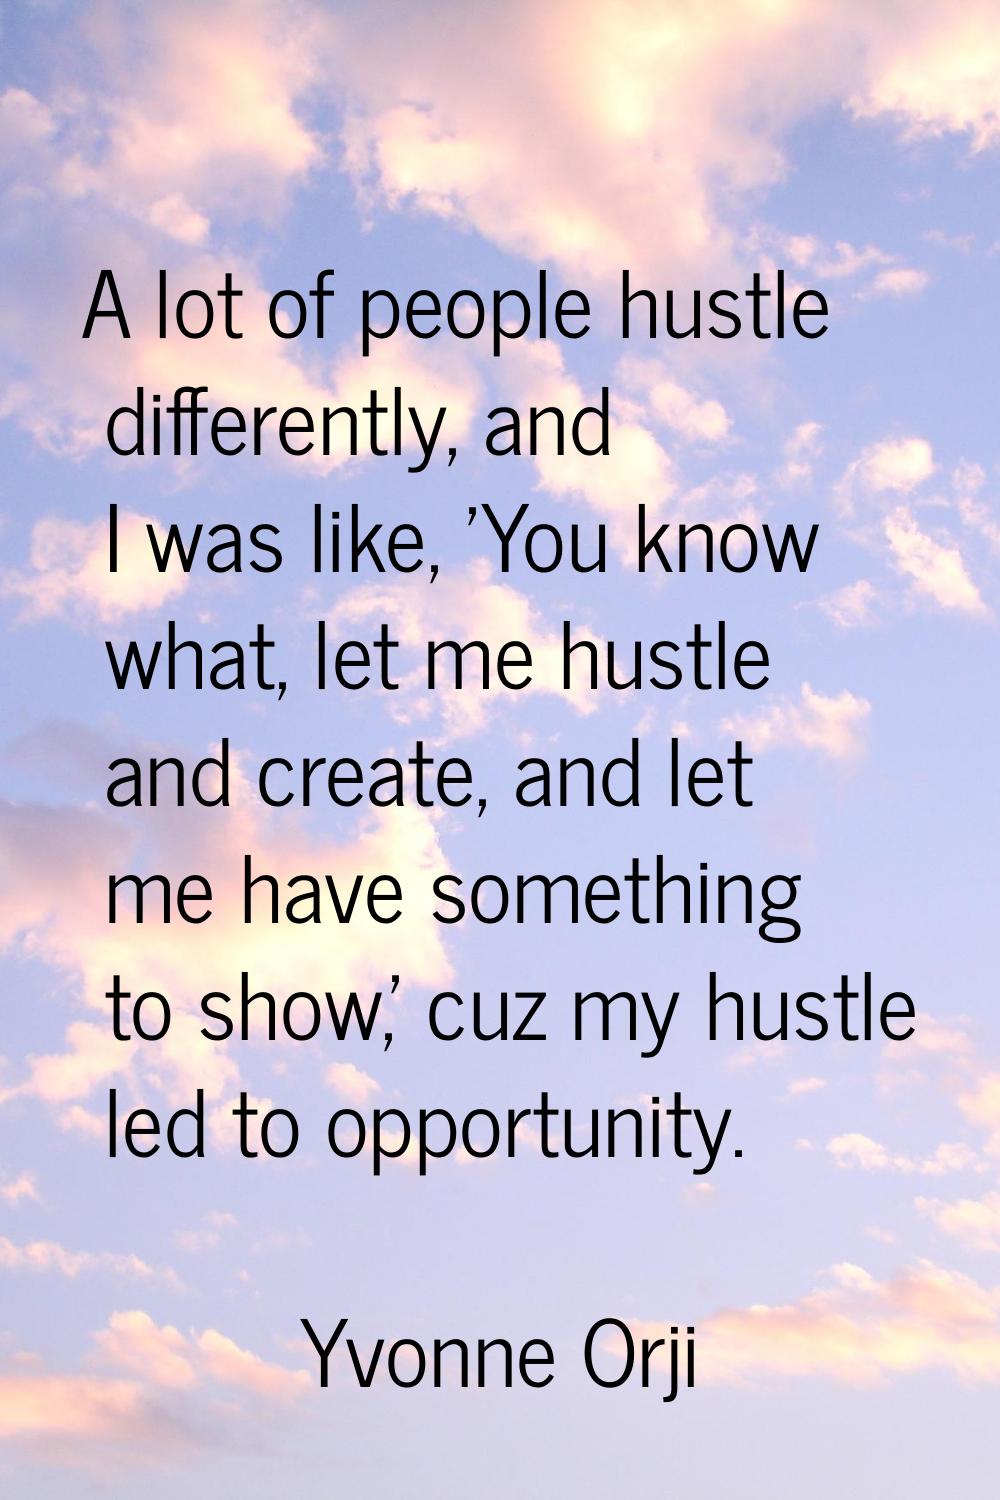 A lot of people hustle differently, and I was like, 'You know what, let me hustle and create, and l